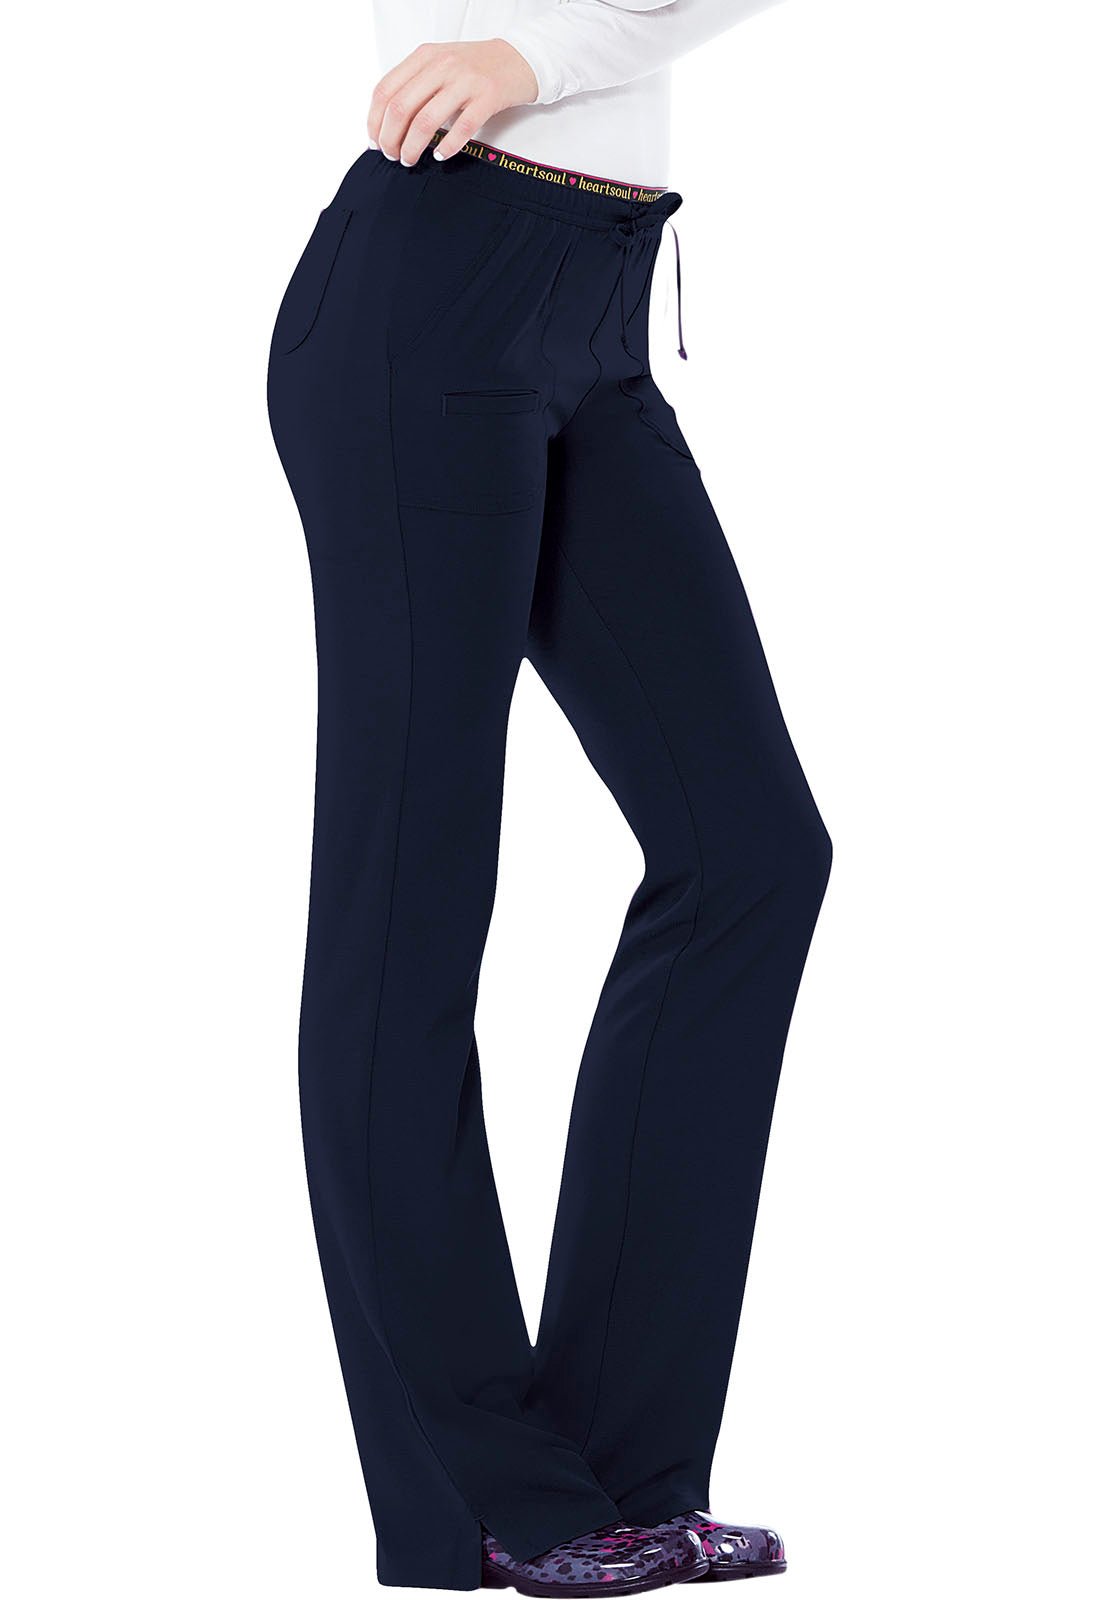 HeartSoul Low Rise Drawstring Pant 20110 in Black, Navy, Pink Party, Red - Scrubs Select